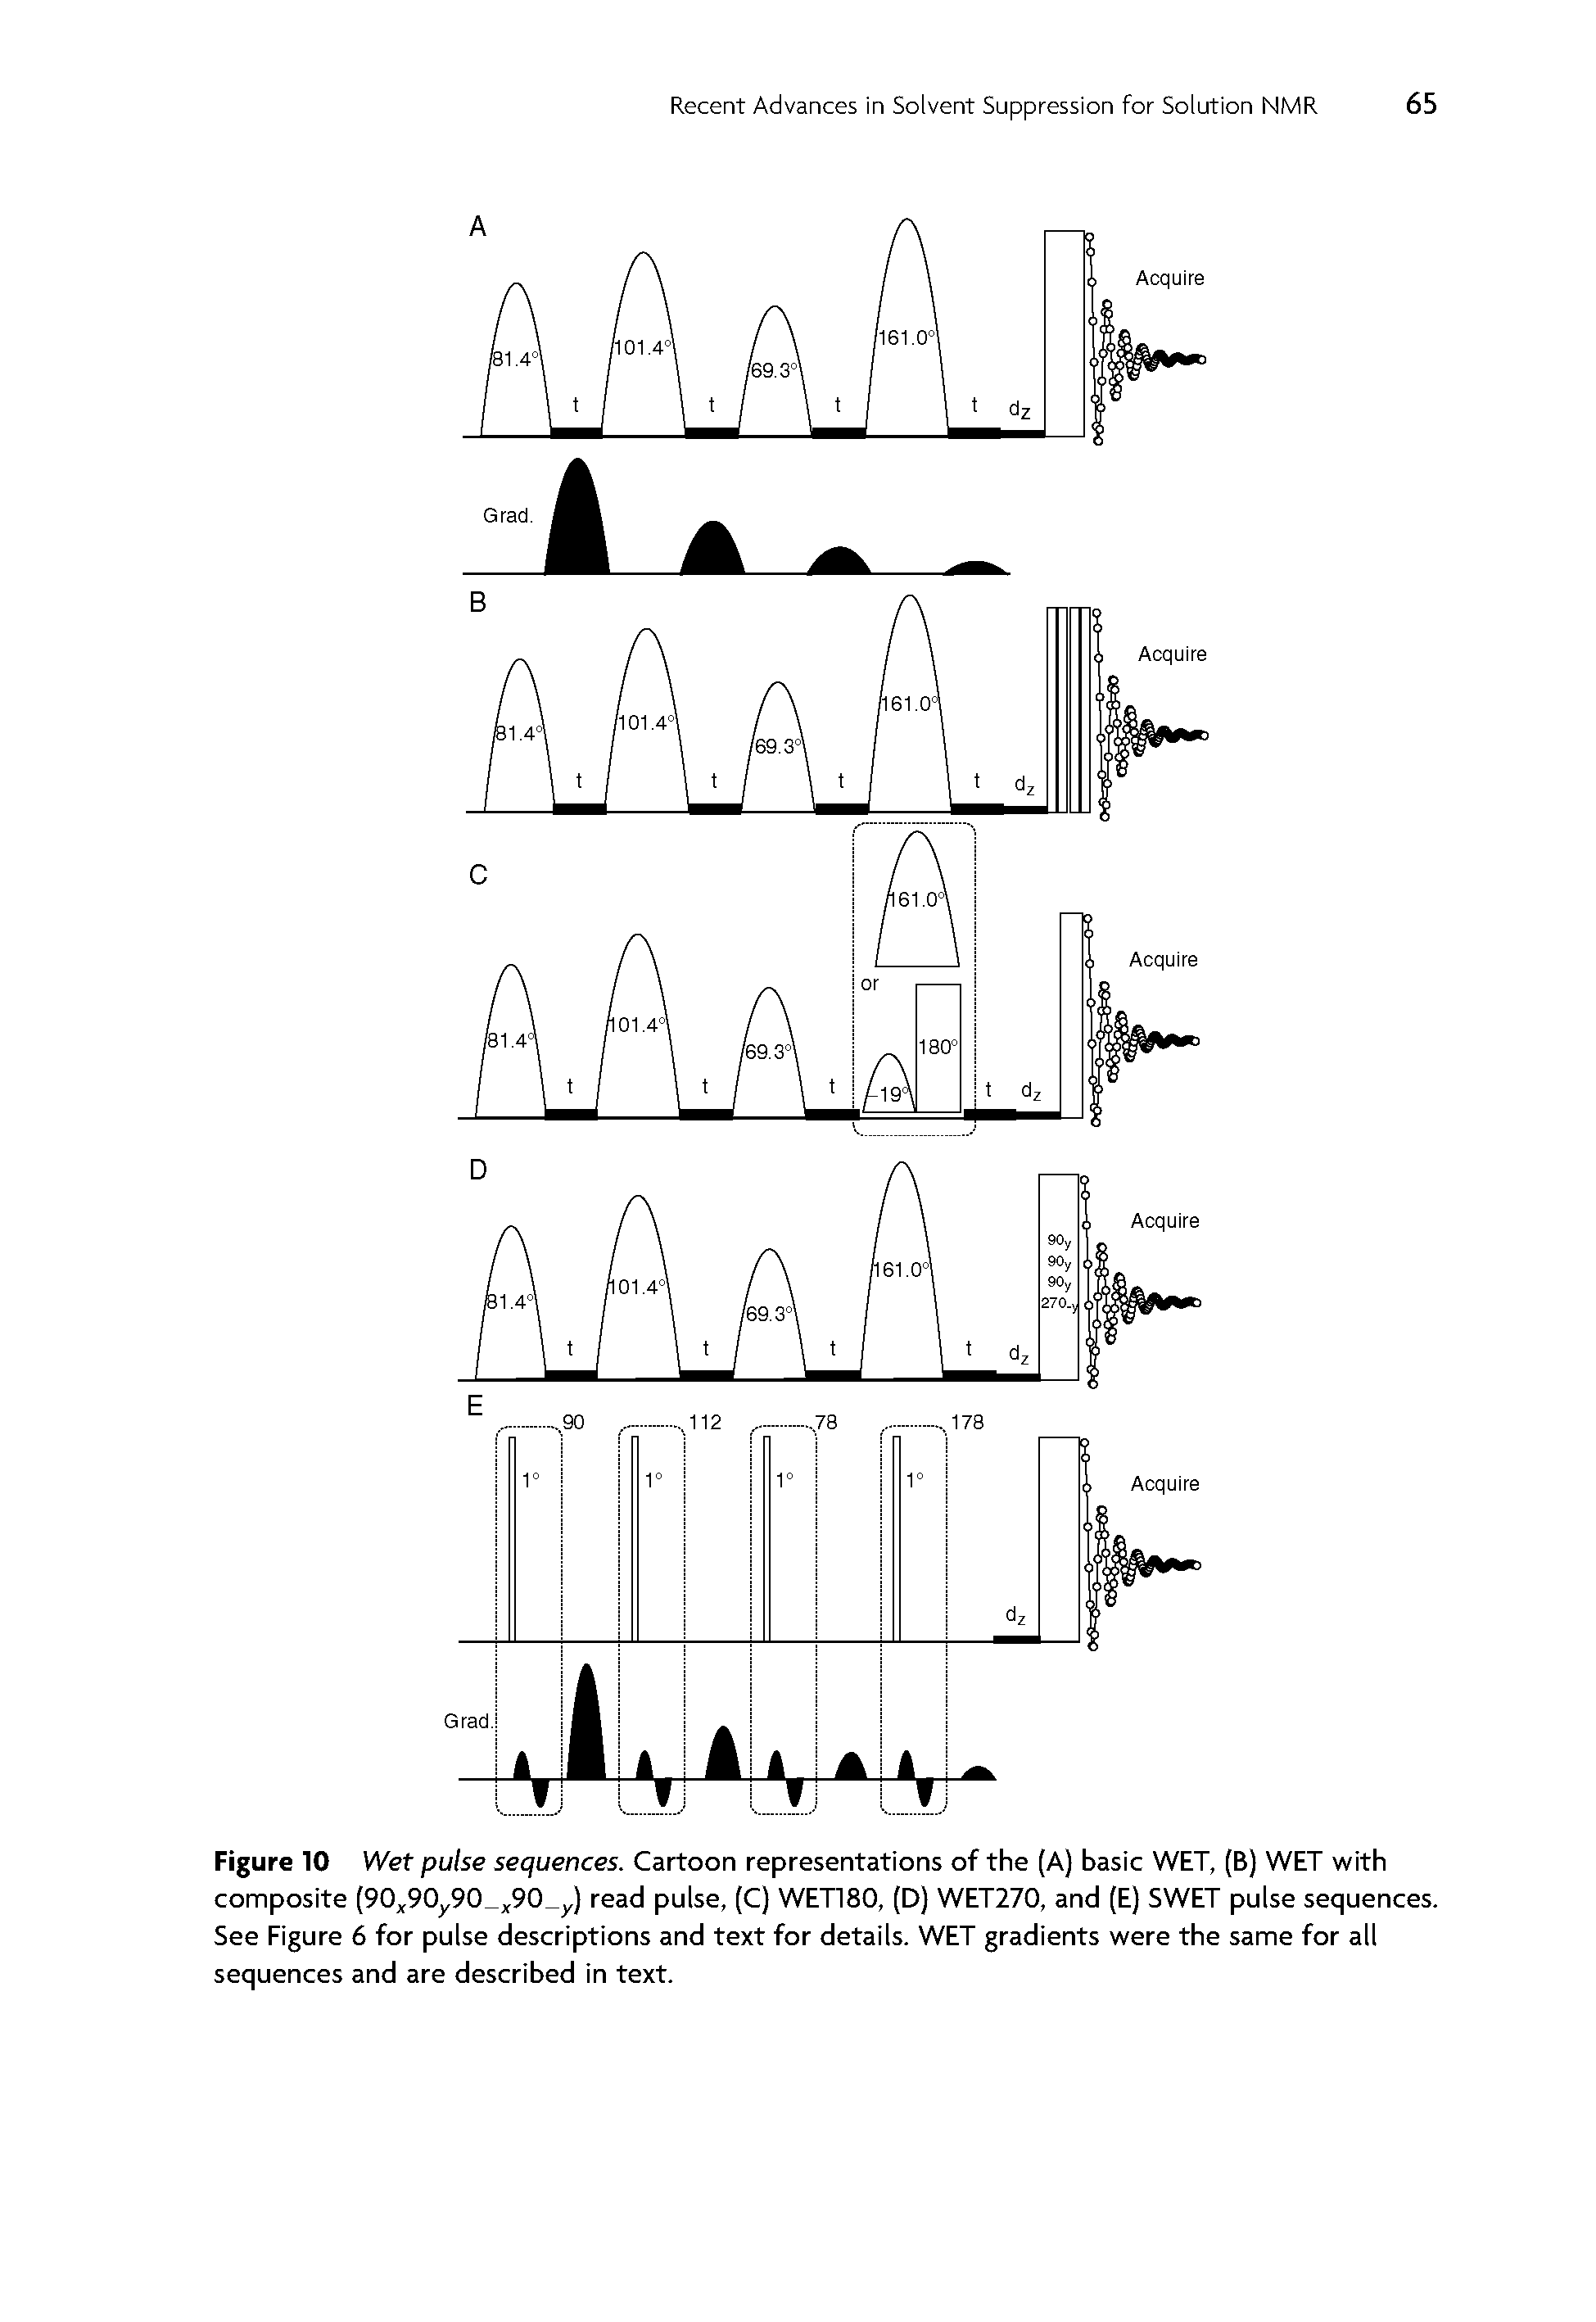 Figure 10 Wet pulse sequences. Cartoon representations of the (A) basic WET, (B) WET with composite (90 90 90 90 ) read pulse, (C) WET180, (D) WET270, and (E) SWET pulse sequences. See Figure 6 for pulse descriptions and text for details. WET gradients were the same for all sequences and are described in text.